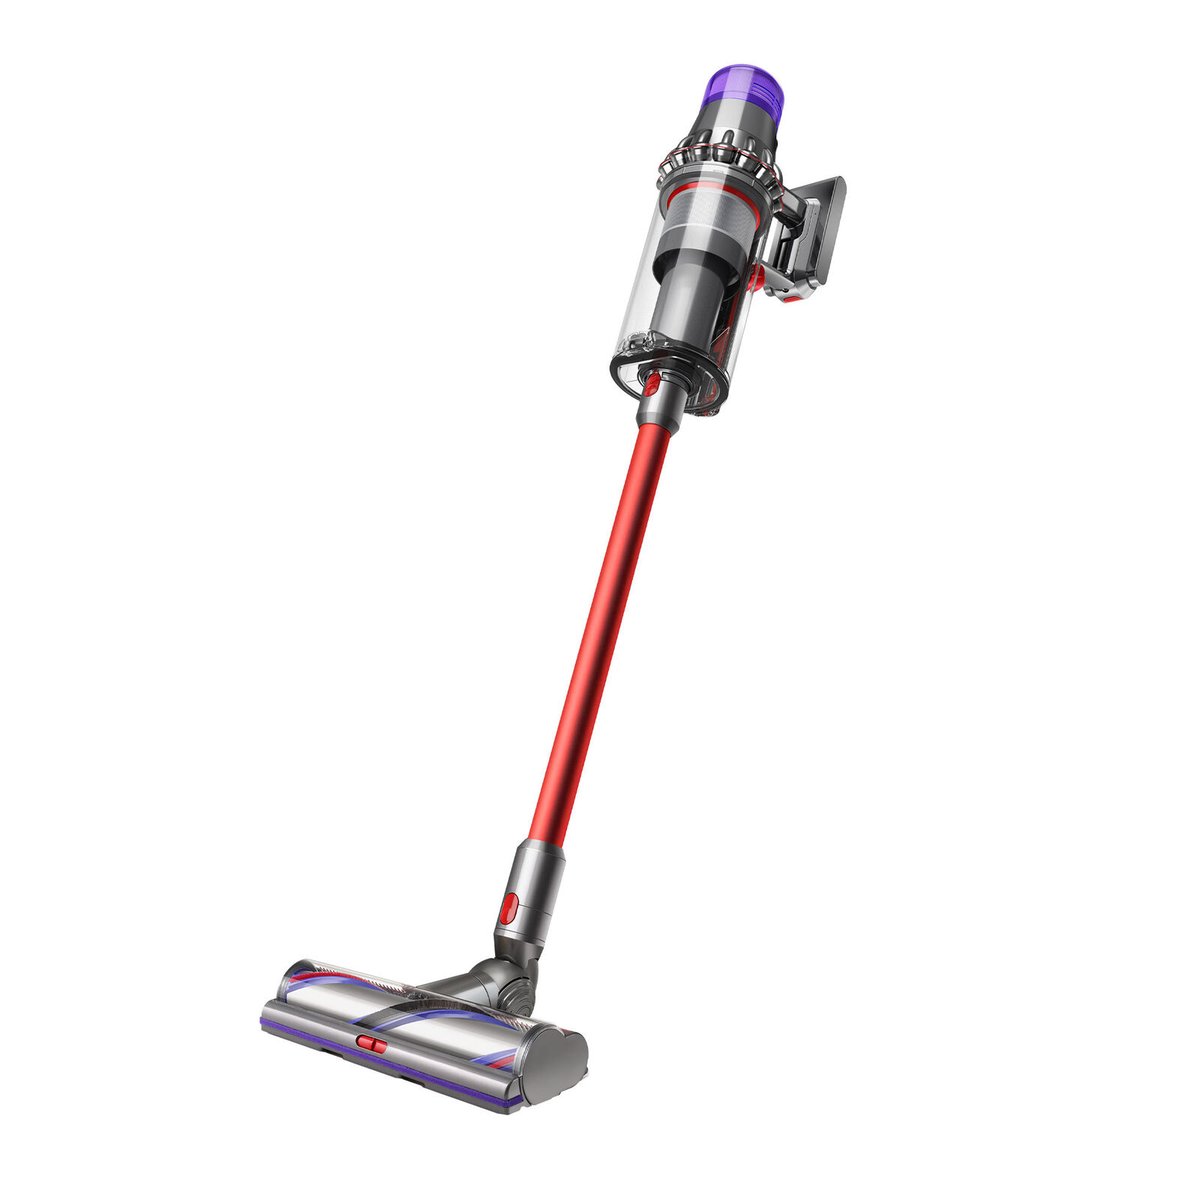 If you’ve always wanted a Dyson vacuum, now’s your time. #affiliatelink: nyti.ms/3QhSiRO